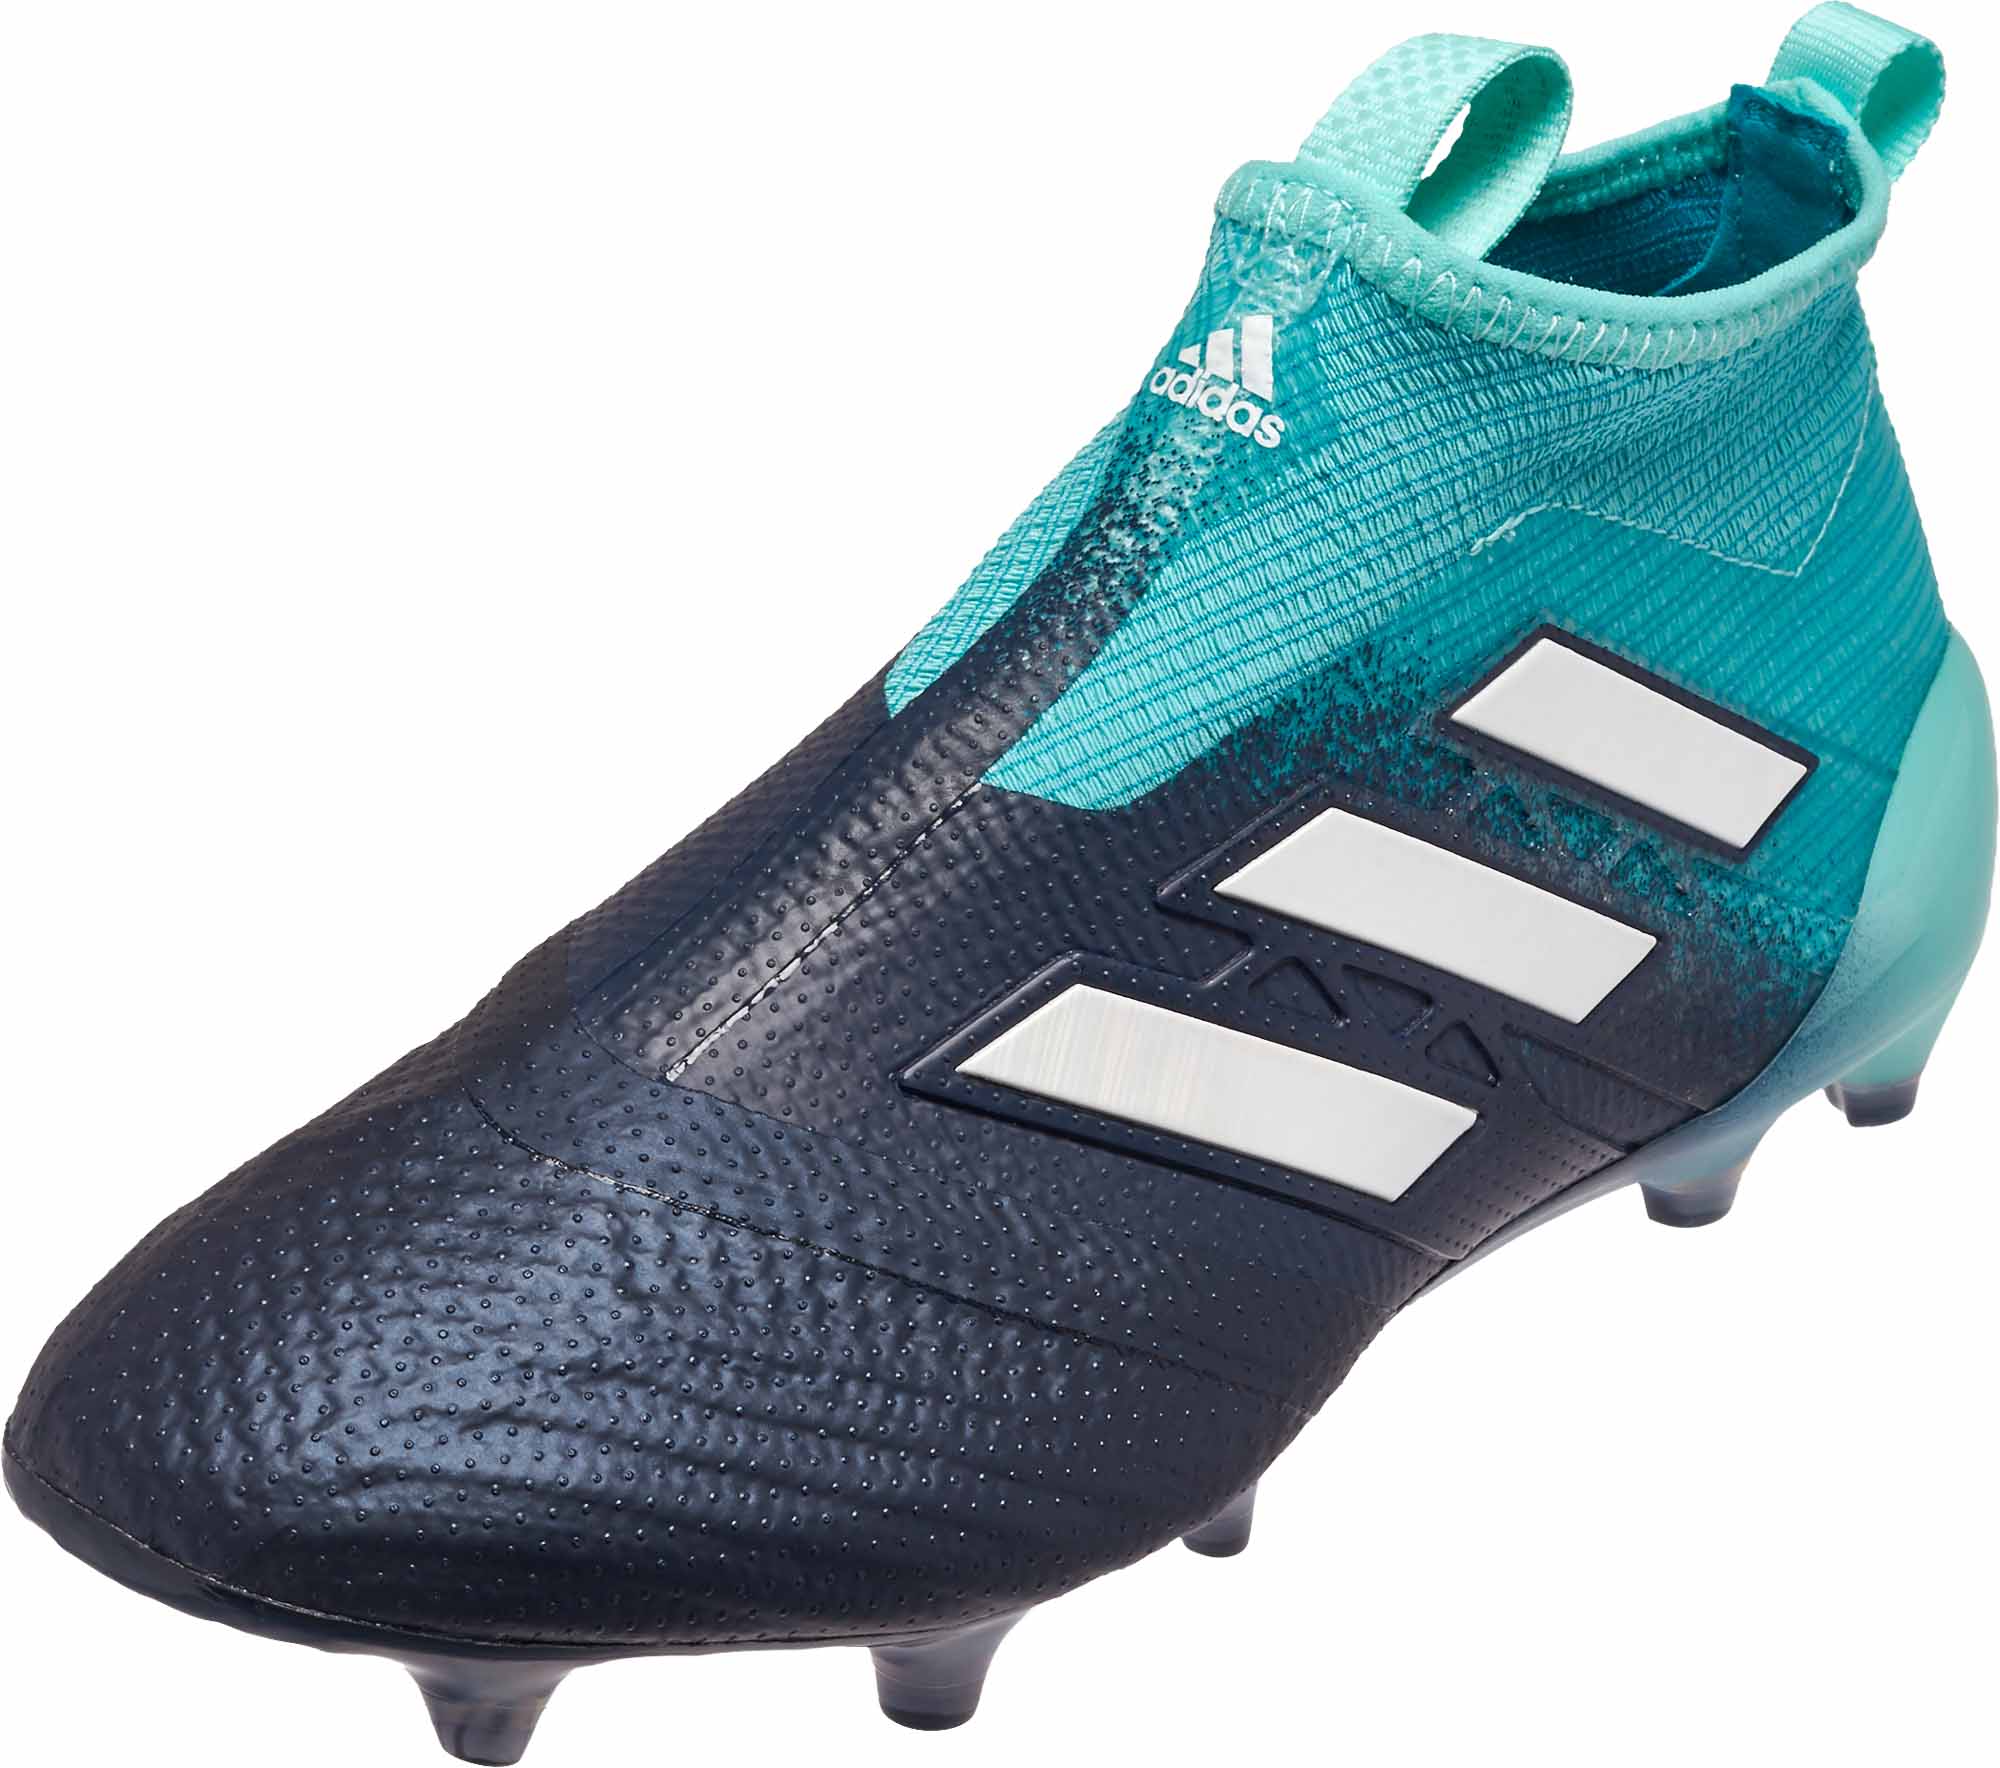 adidas ace 17 purecontrol fg soccer cleat